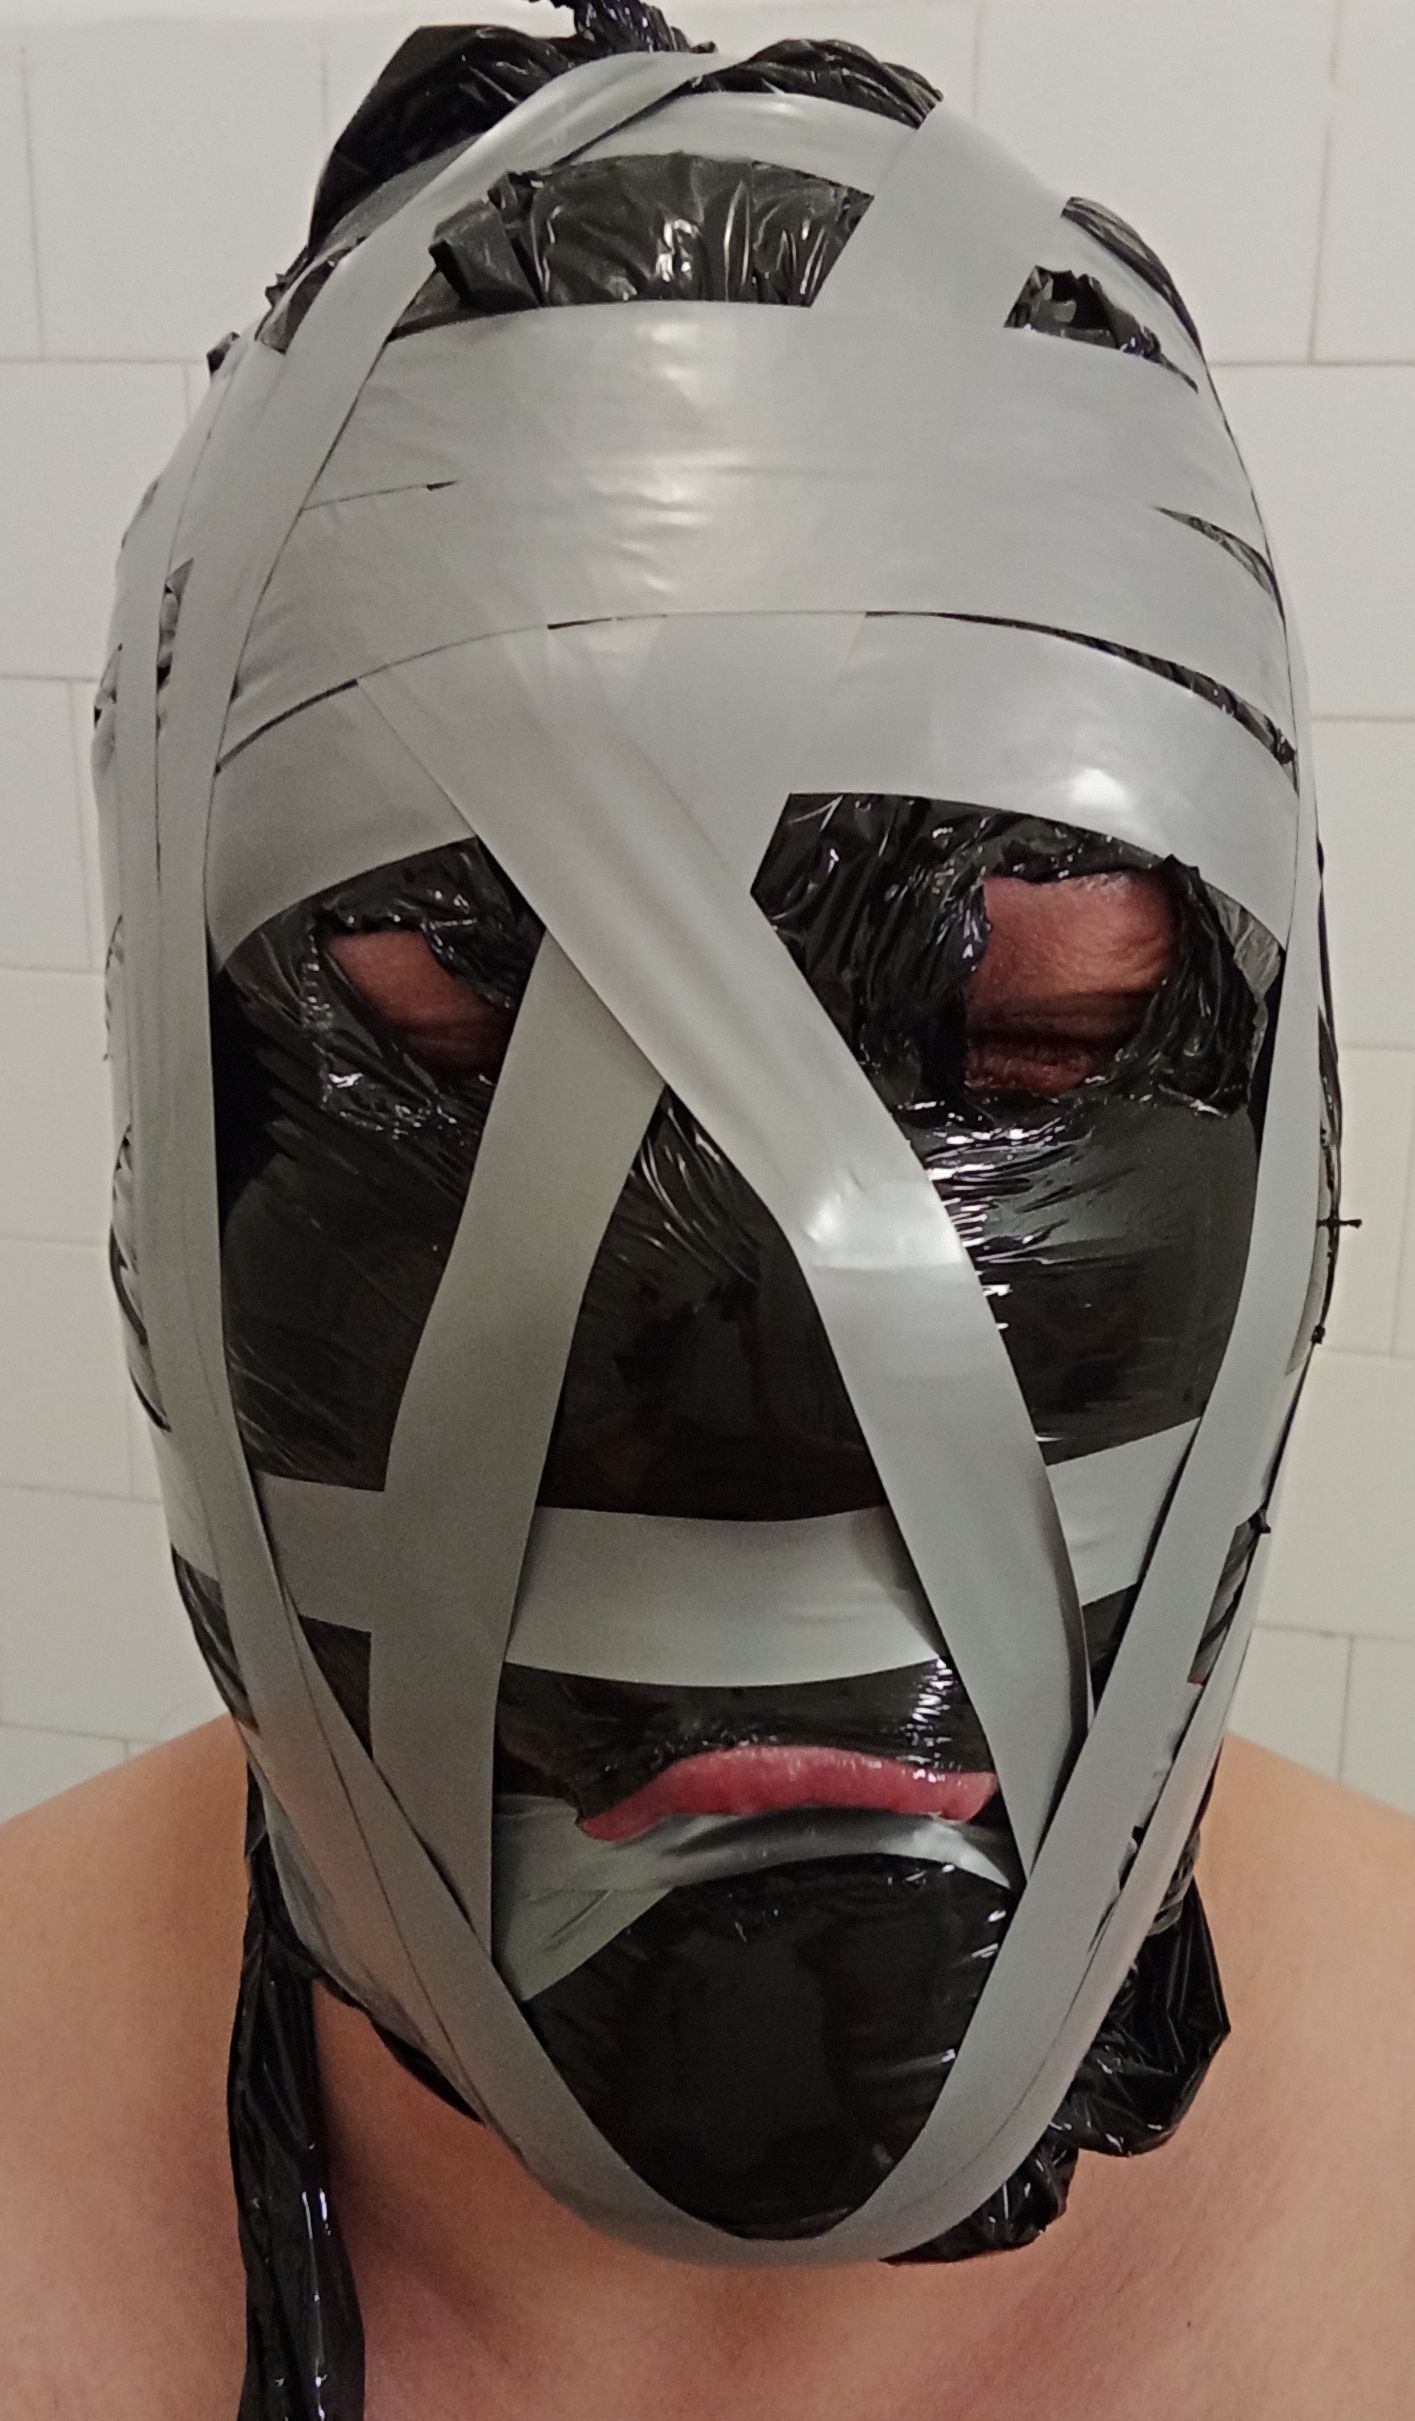 Saran wrap and duct tape cover cocksucker head loyal sex slave